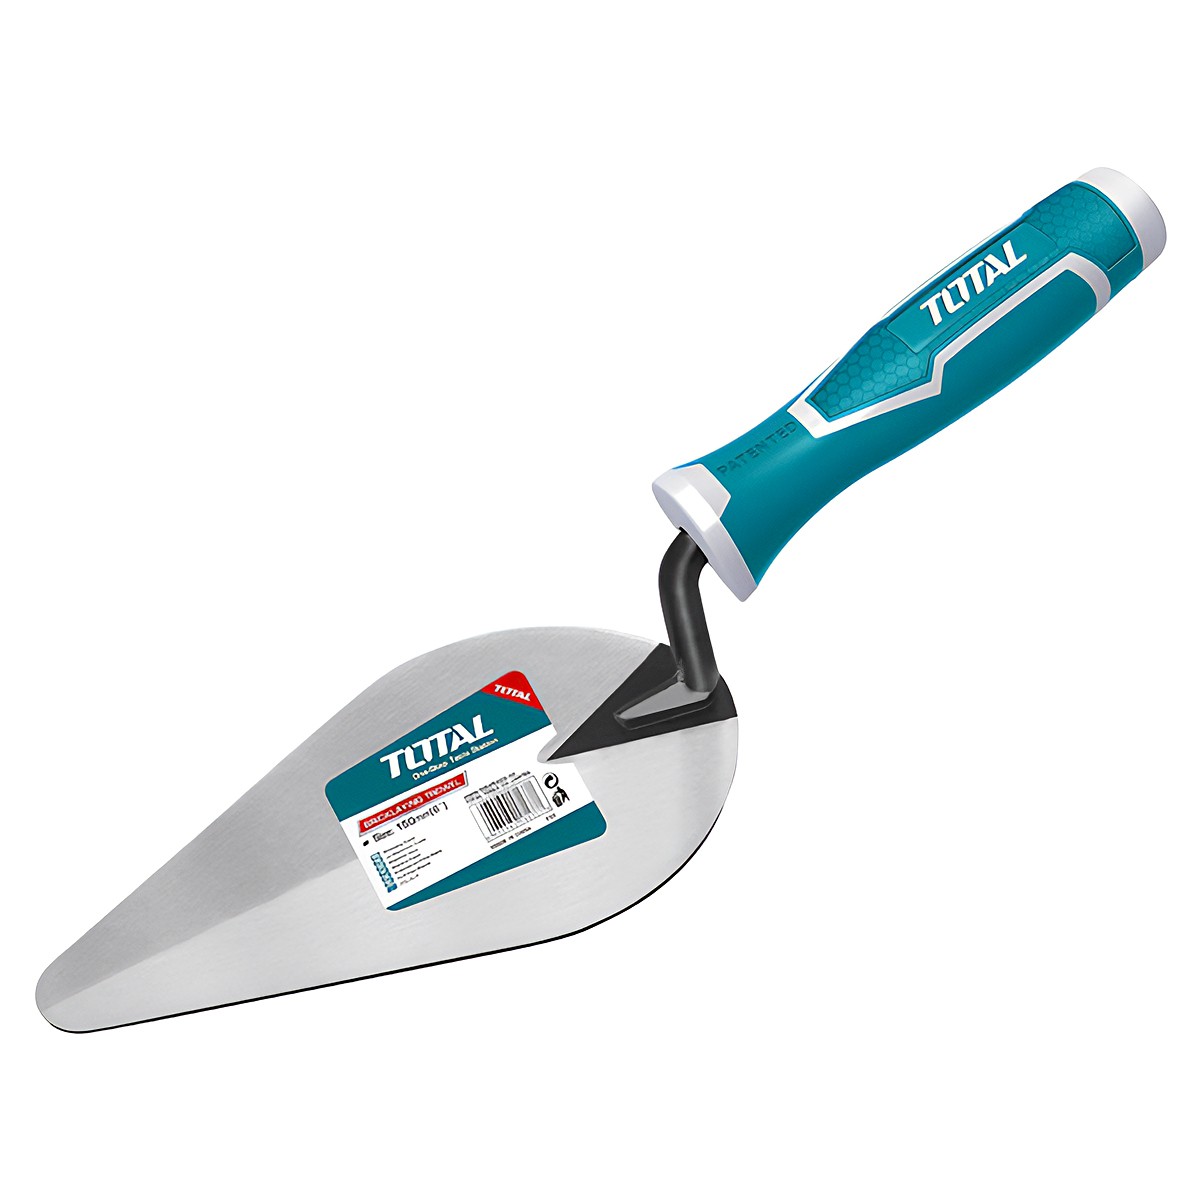 TOTAL BRICKLAYING TROWEL 8"